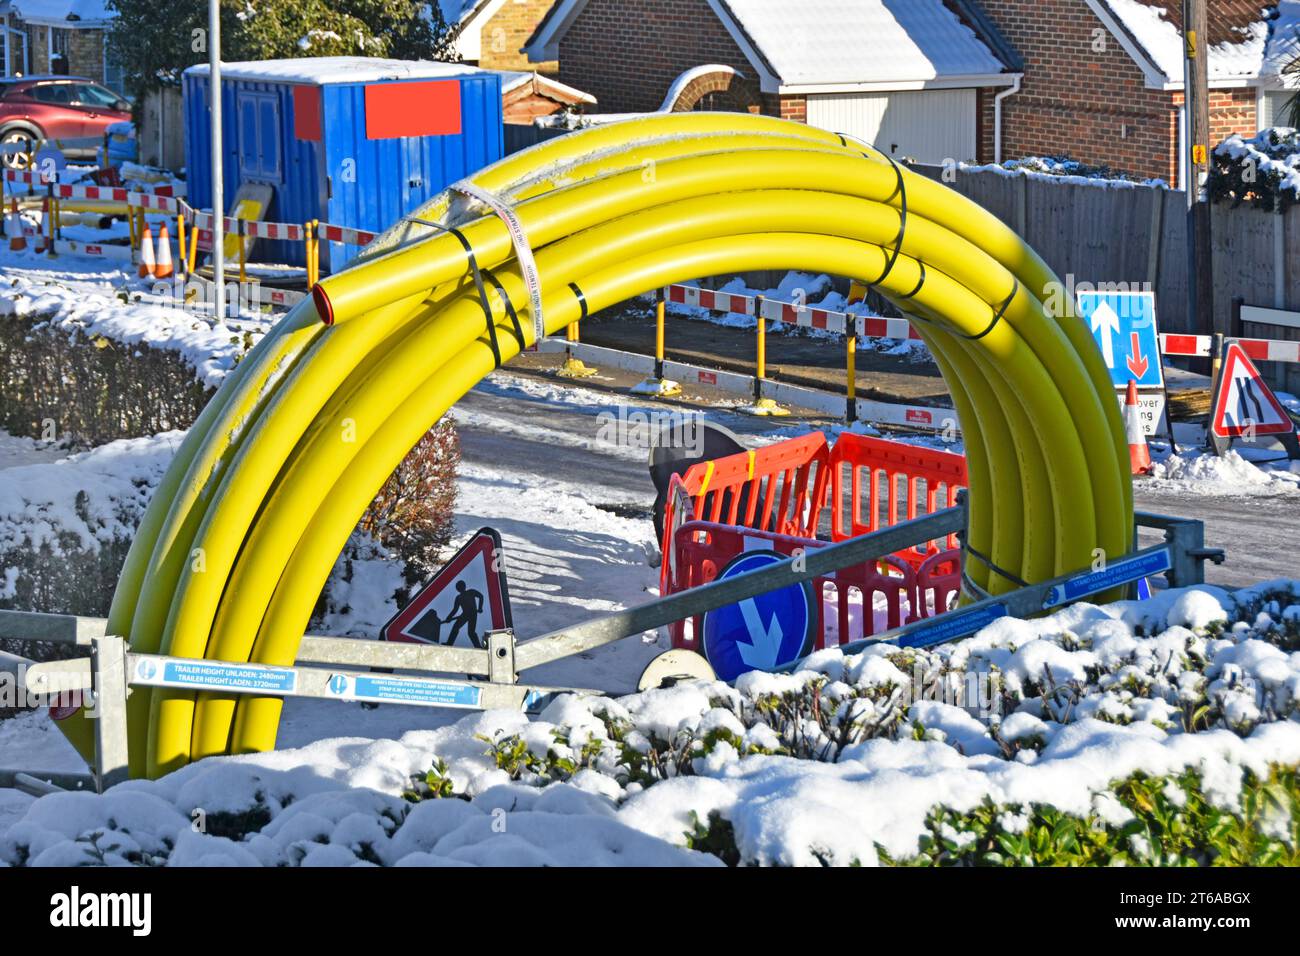 Winter snow & icy roads shuts down street works in residential village large coiled yellow gas main pipe to replace aging cast iron Essex England UK Stock Photo